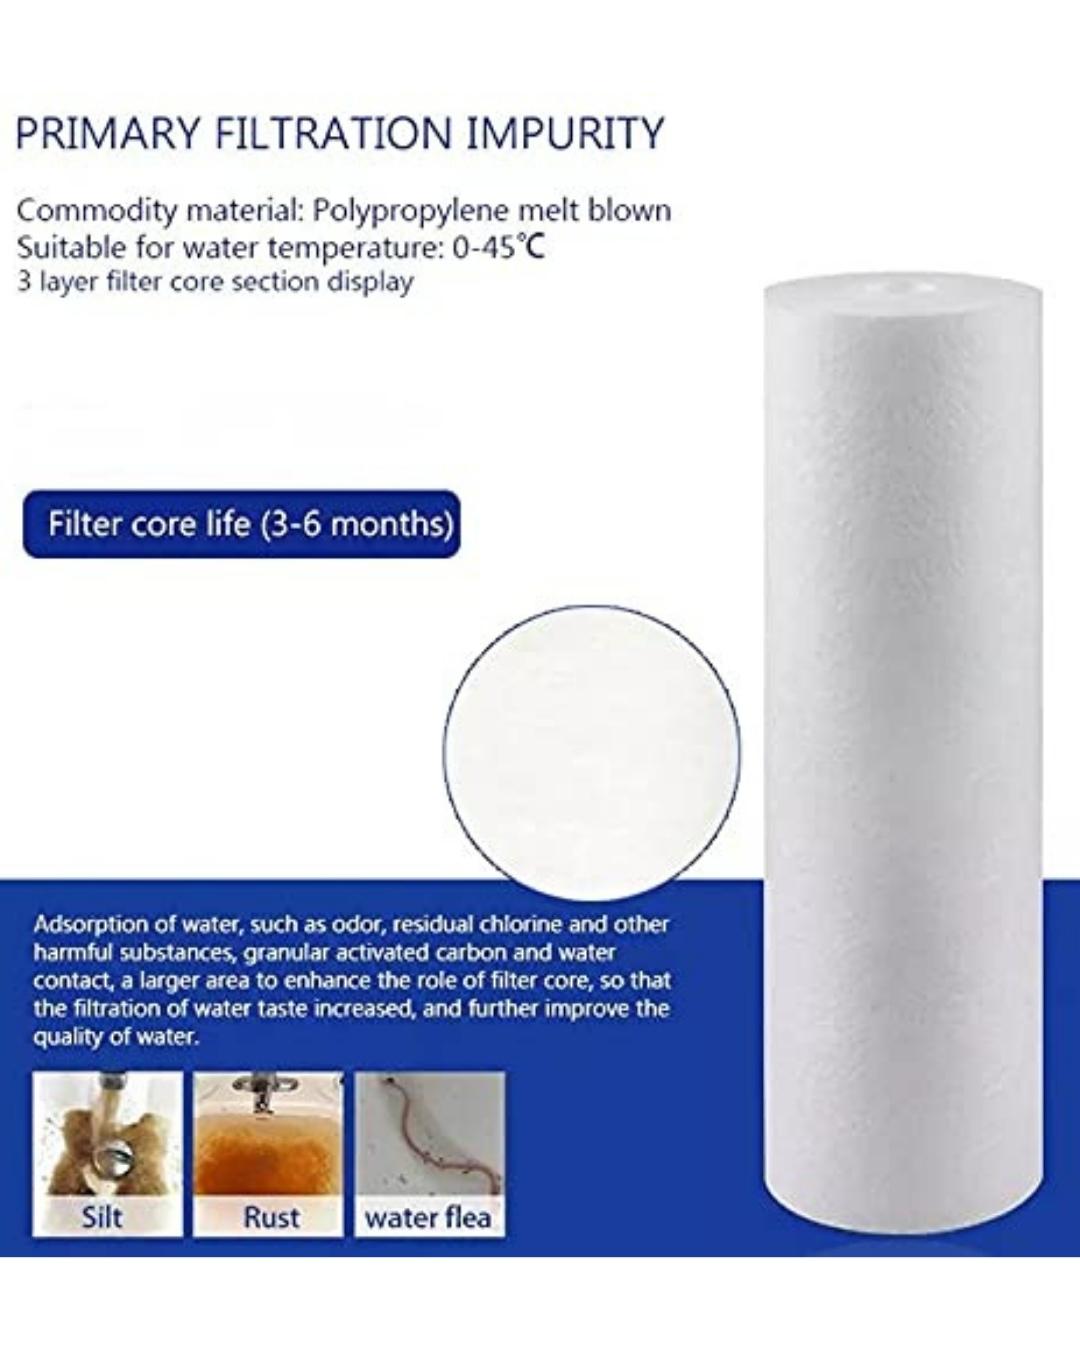 Sediment Water Filter Cartridge Replacement - 1 Micron, 2.5" x 20" Filter